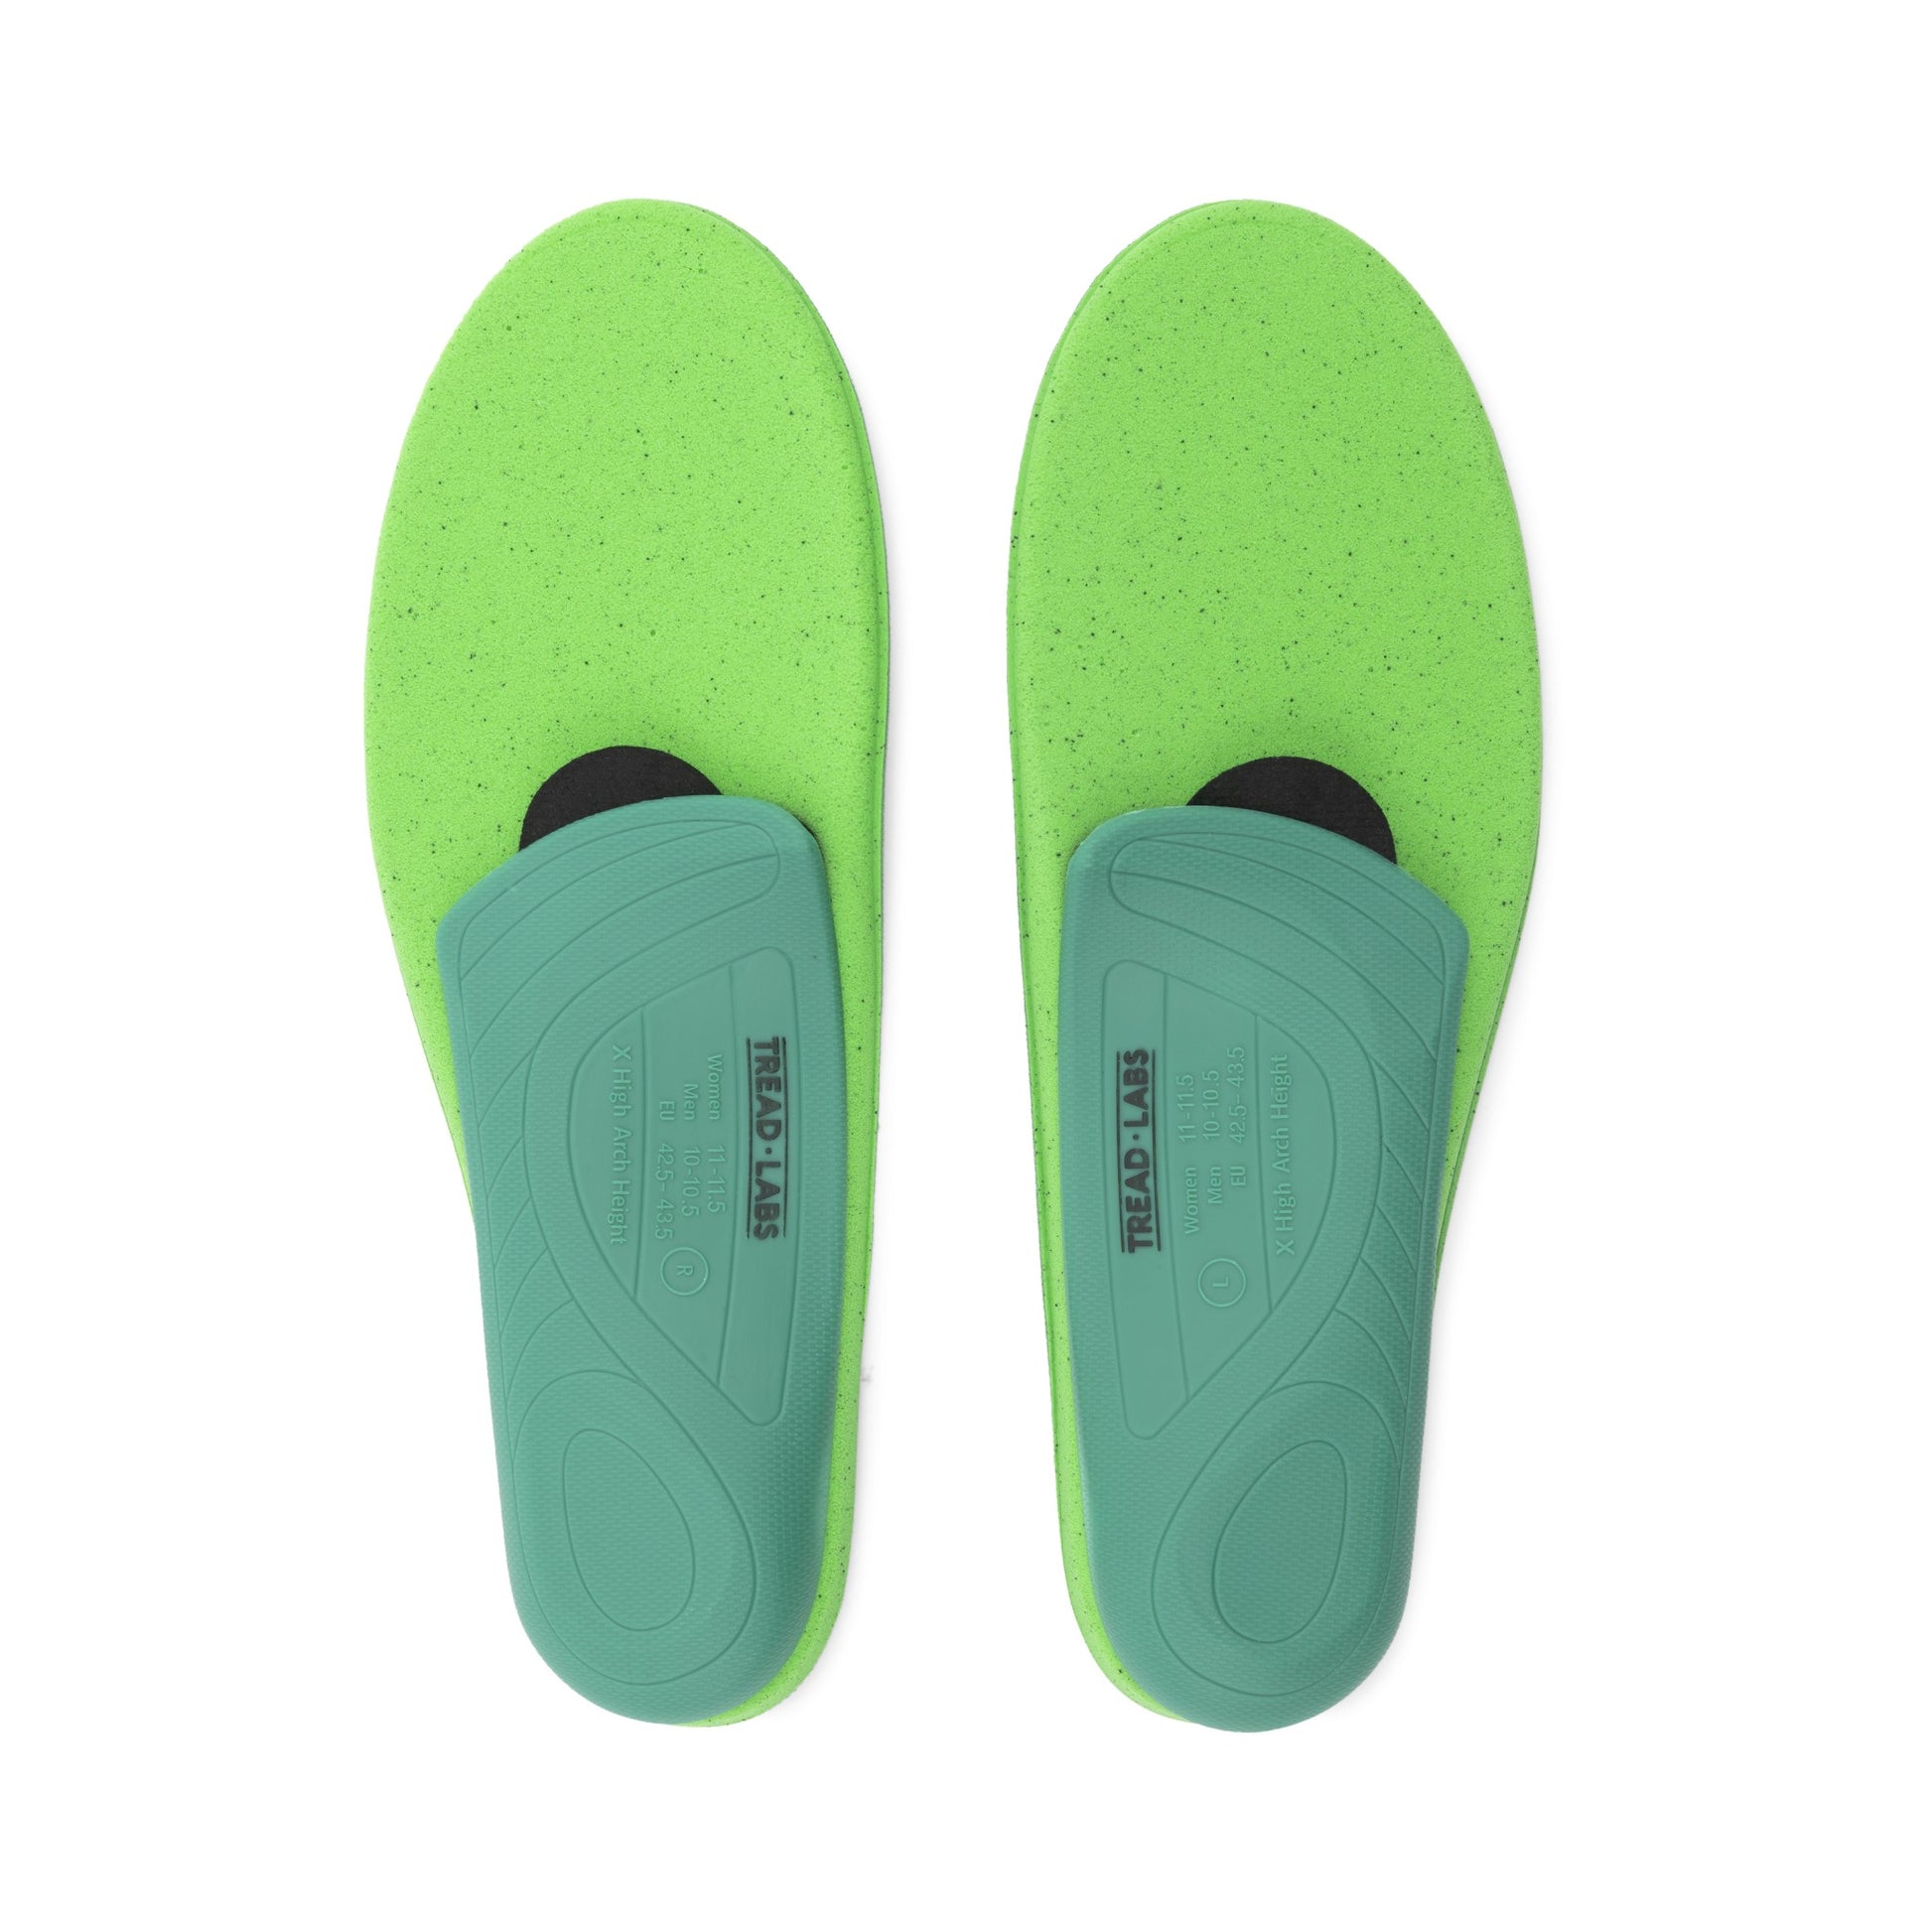 Metatarsal pads and Ramble orthotic insoles by Tread Labs